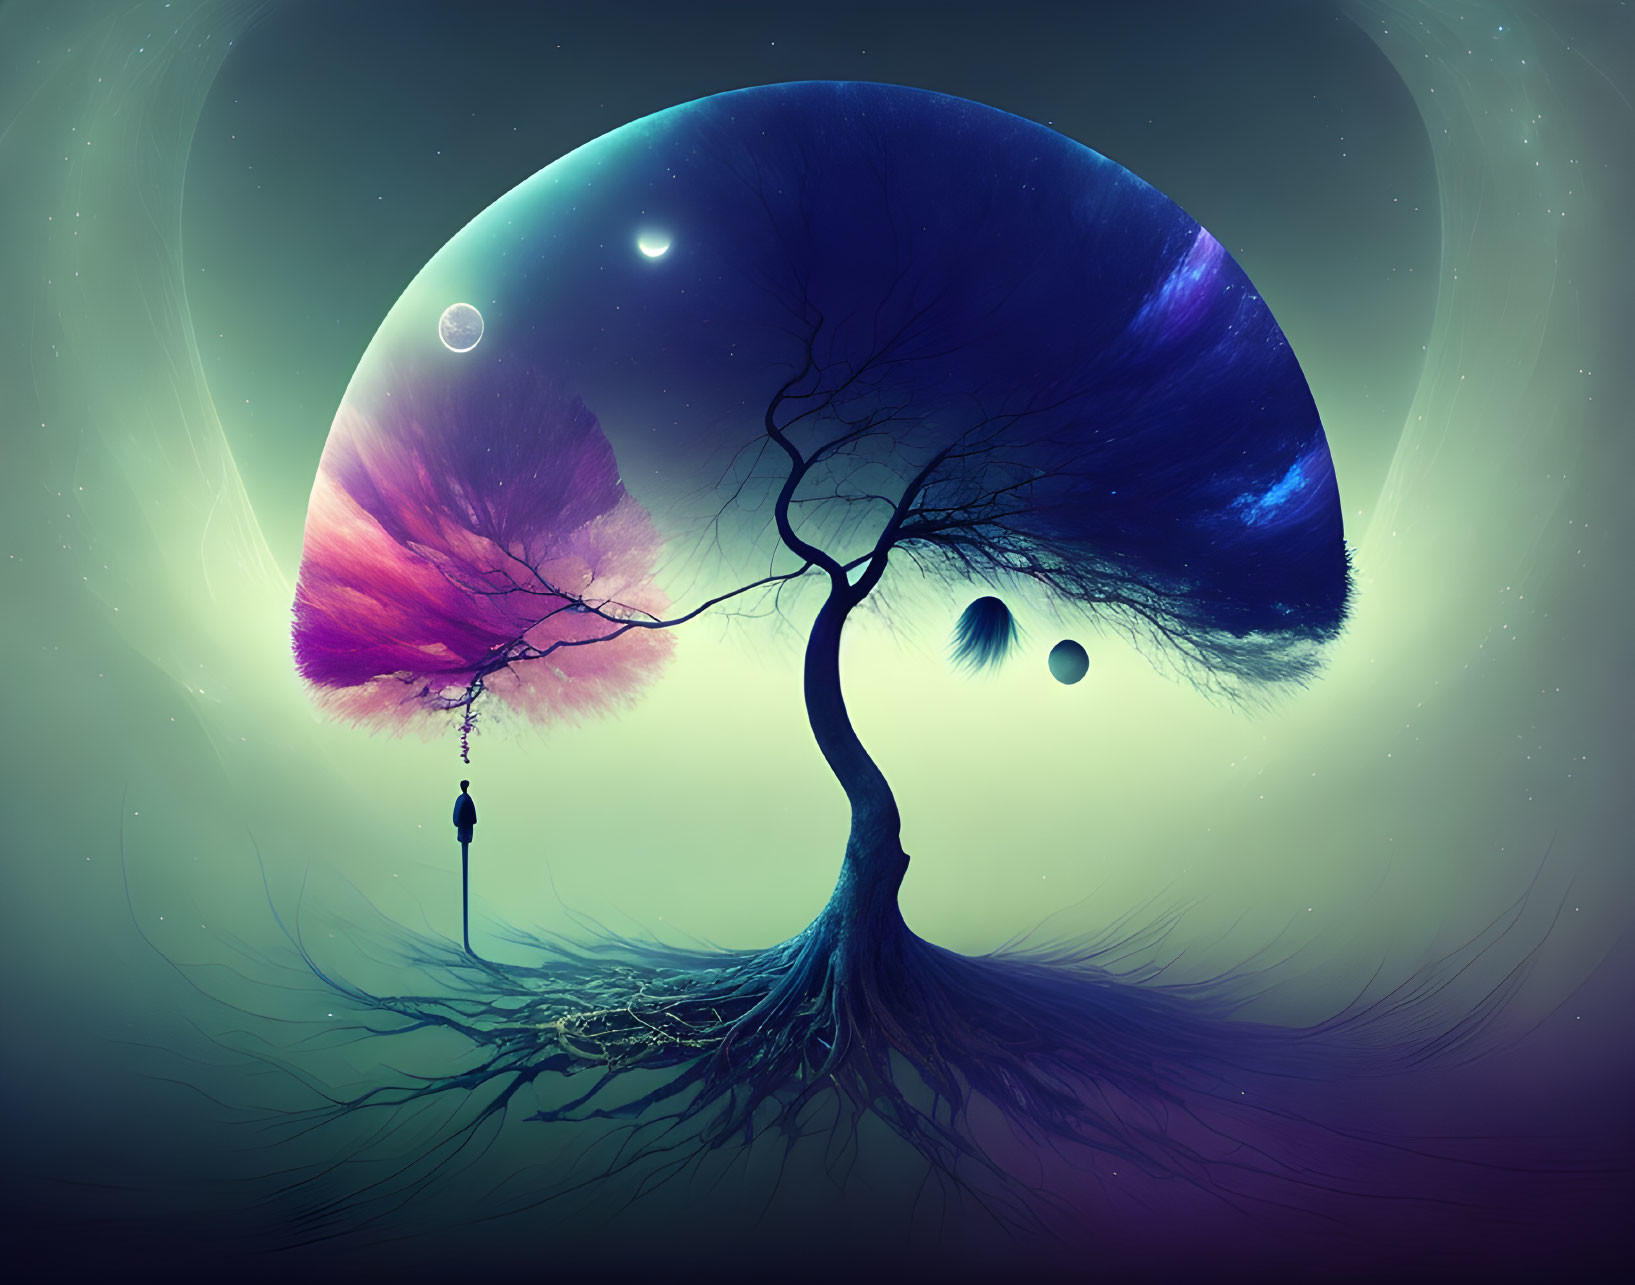 Surreal illustration: Tree with celestial canopy in cosmic setting